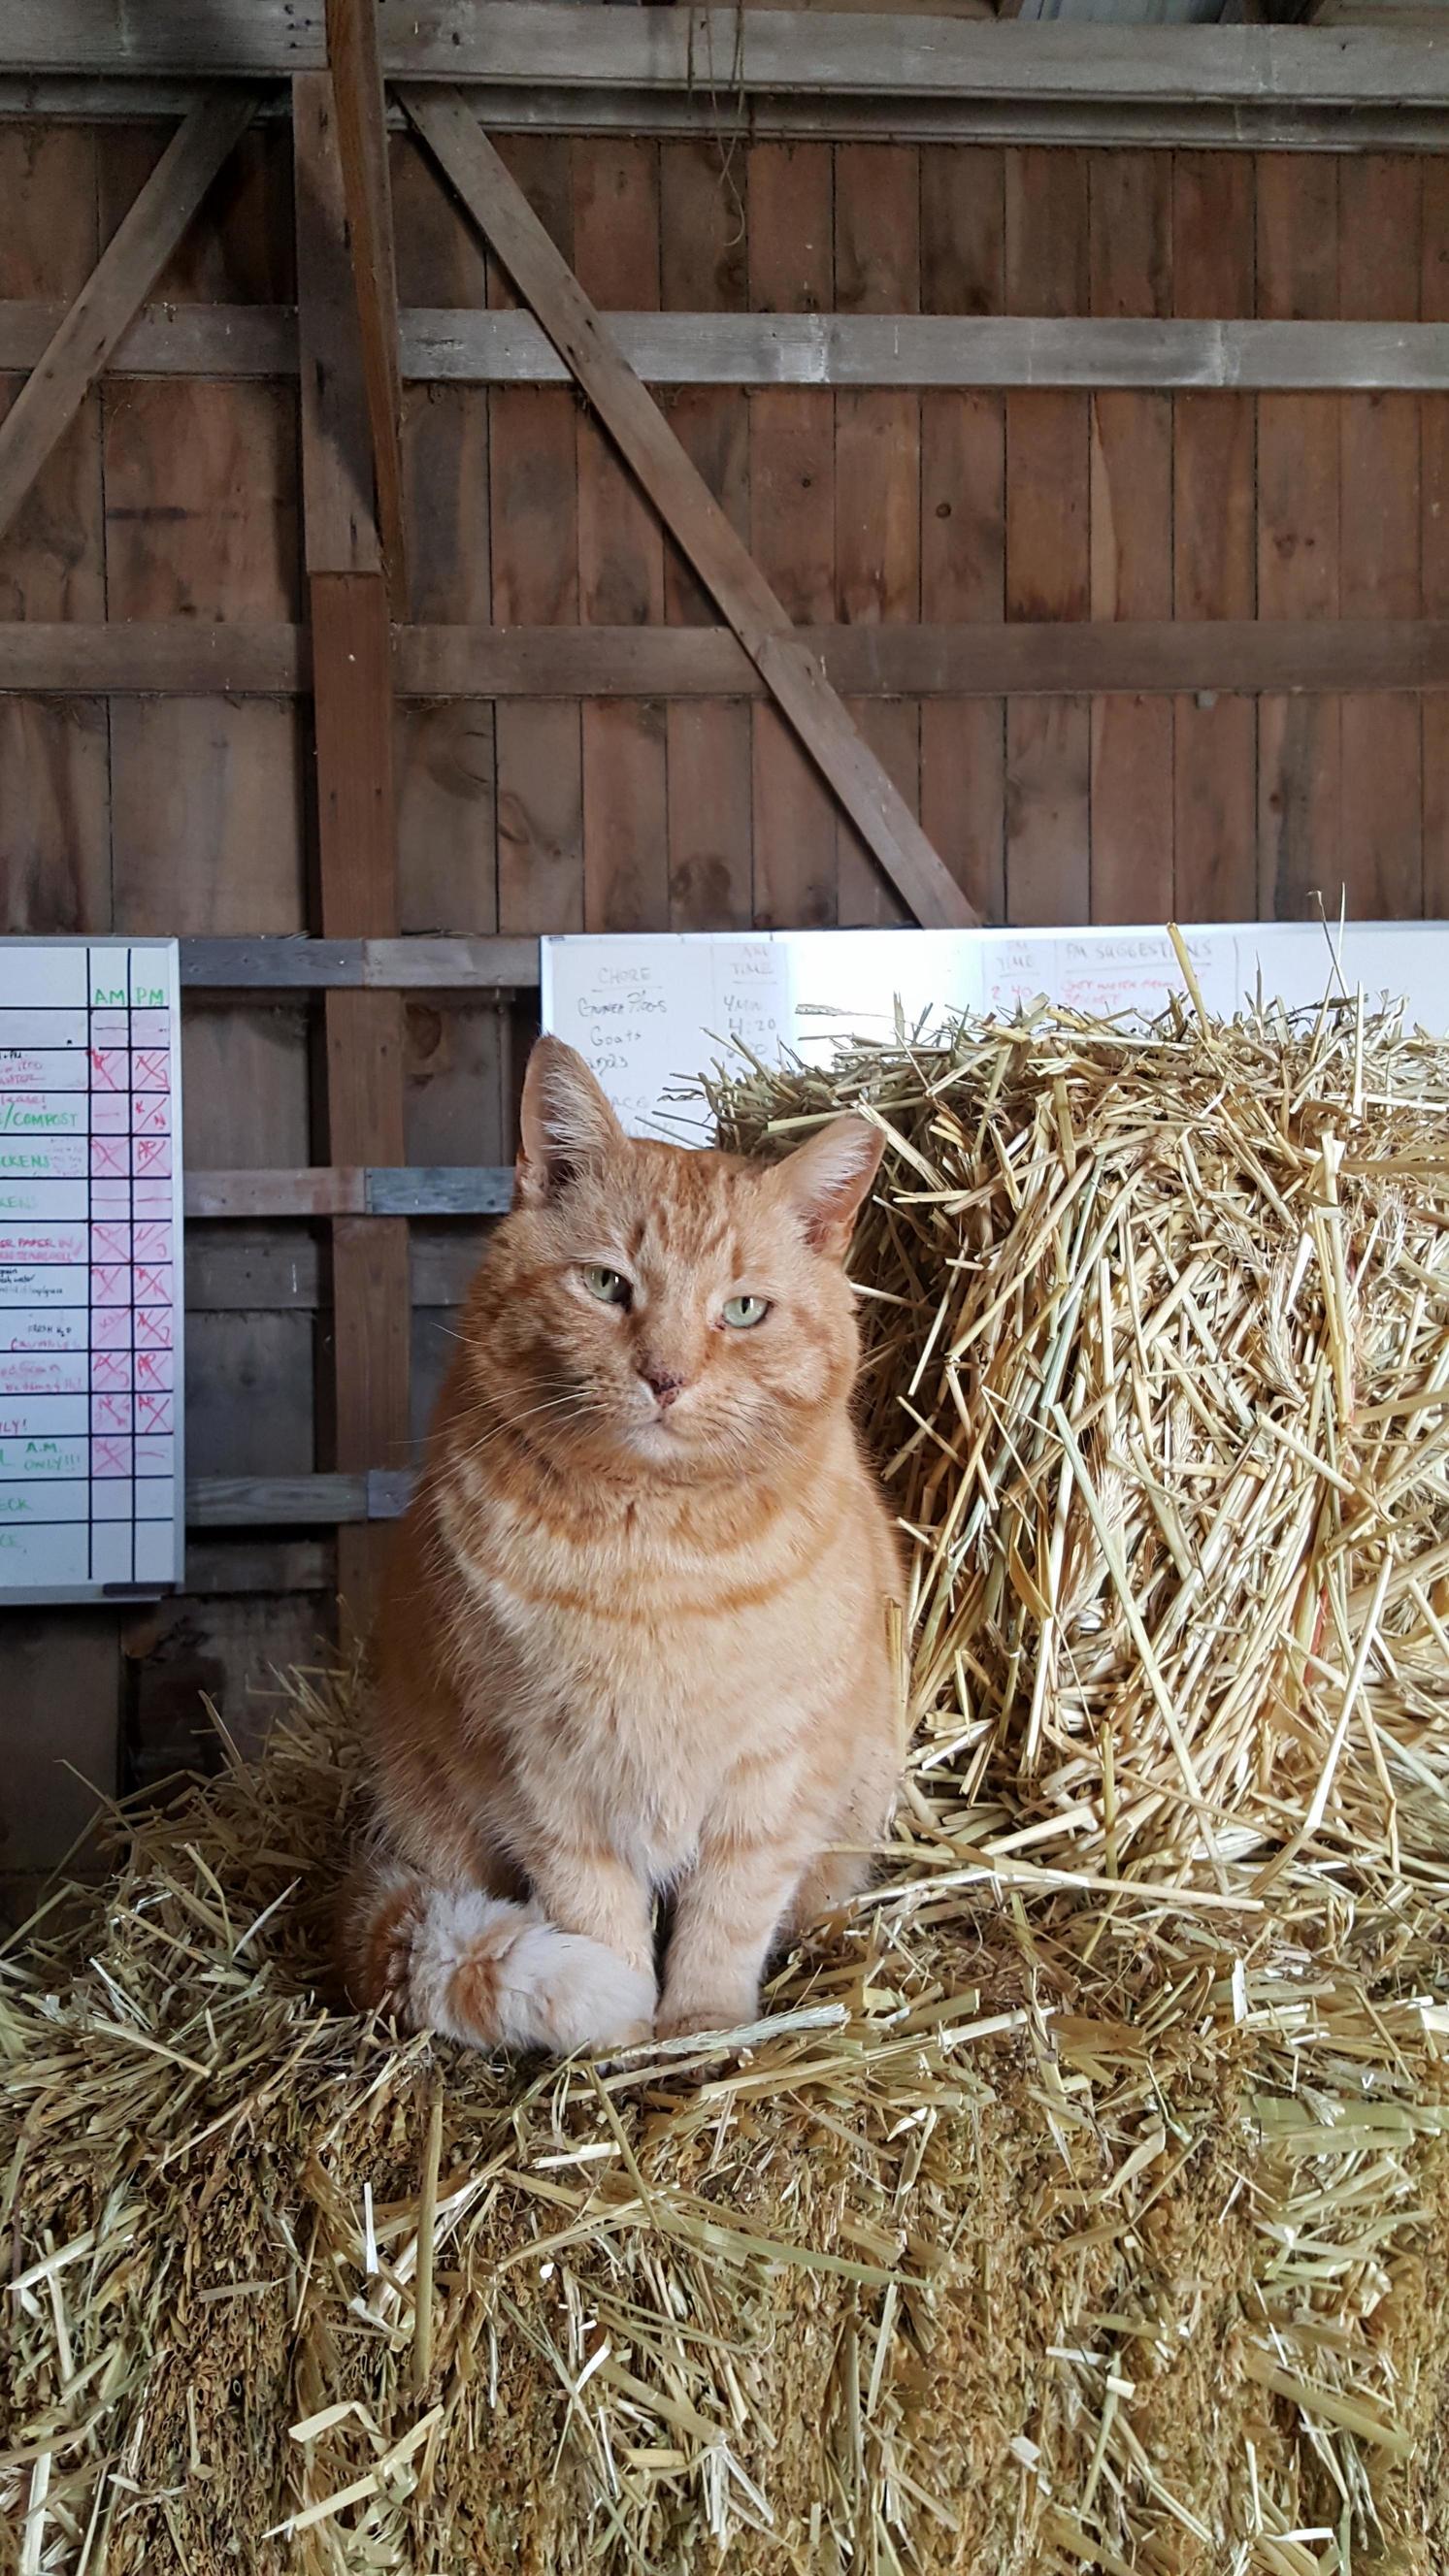 Pony cat looking dapper in the barn.